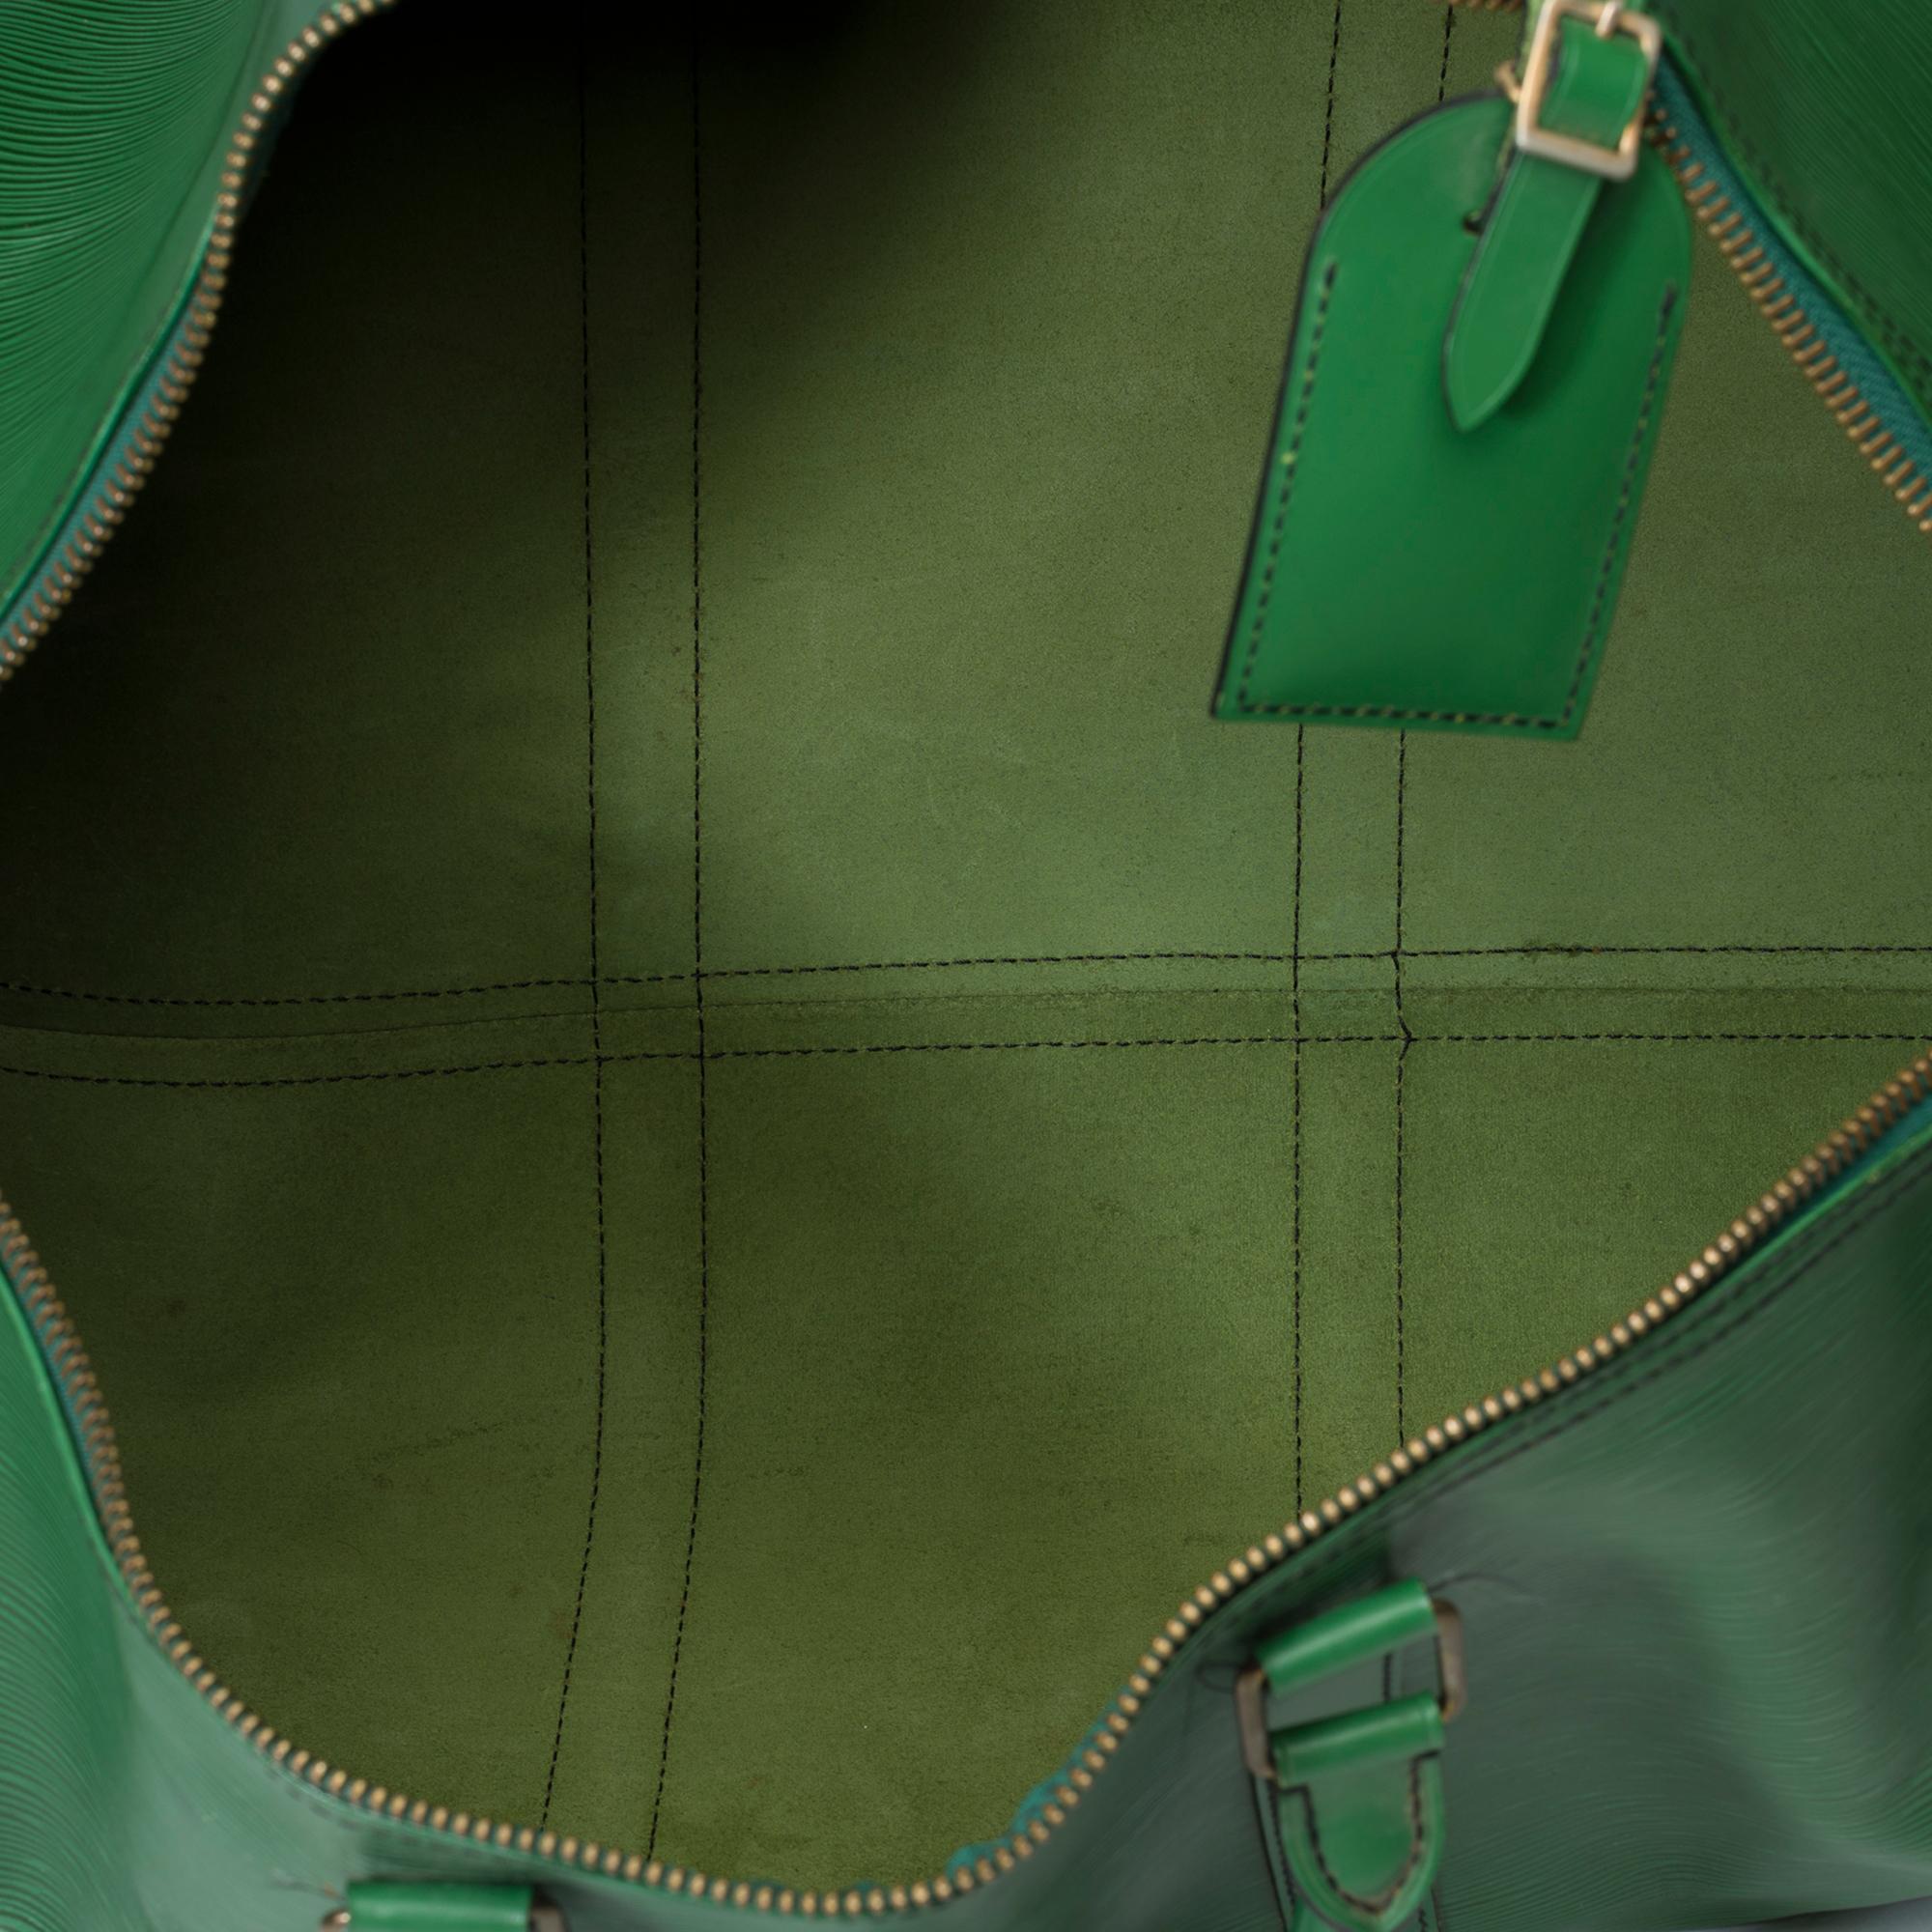 Louis Vuitton Keepall 50 Travel bag in Green épi leather, GHW 4